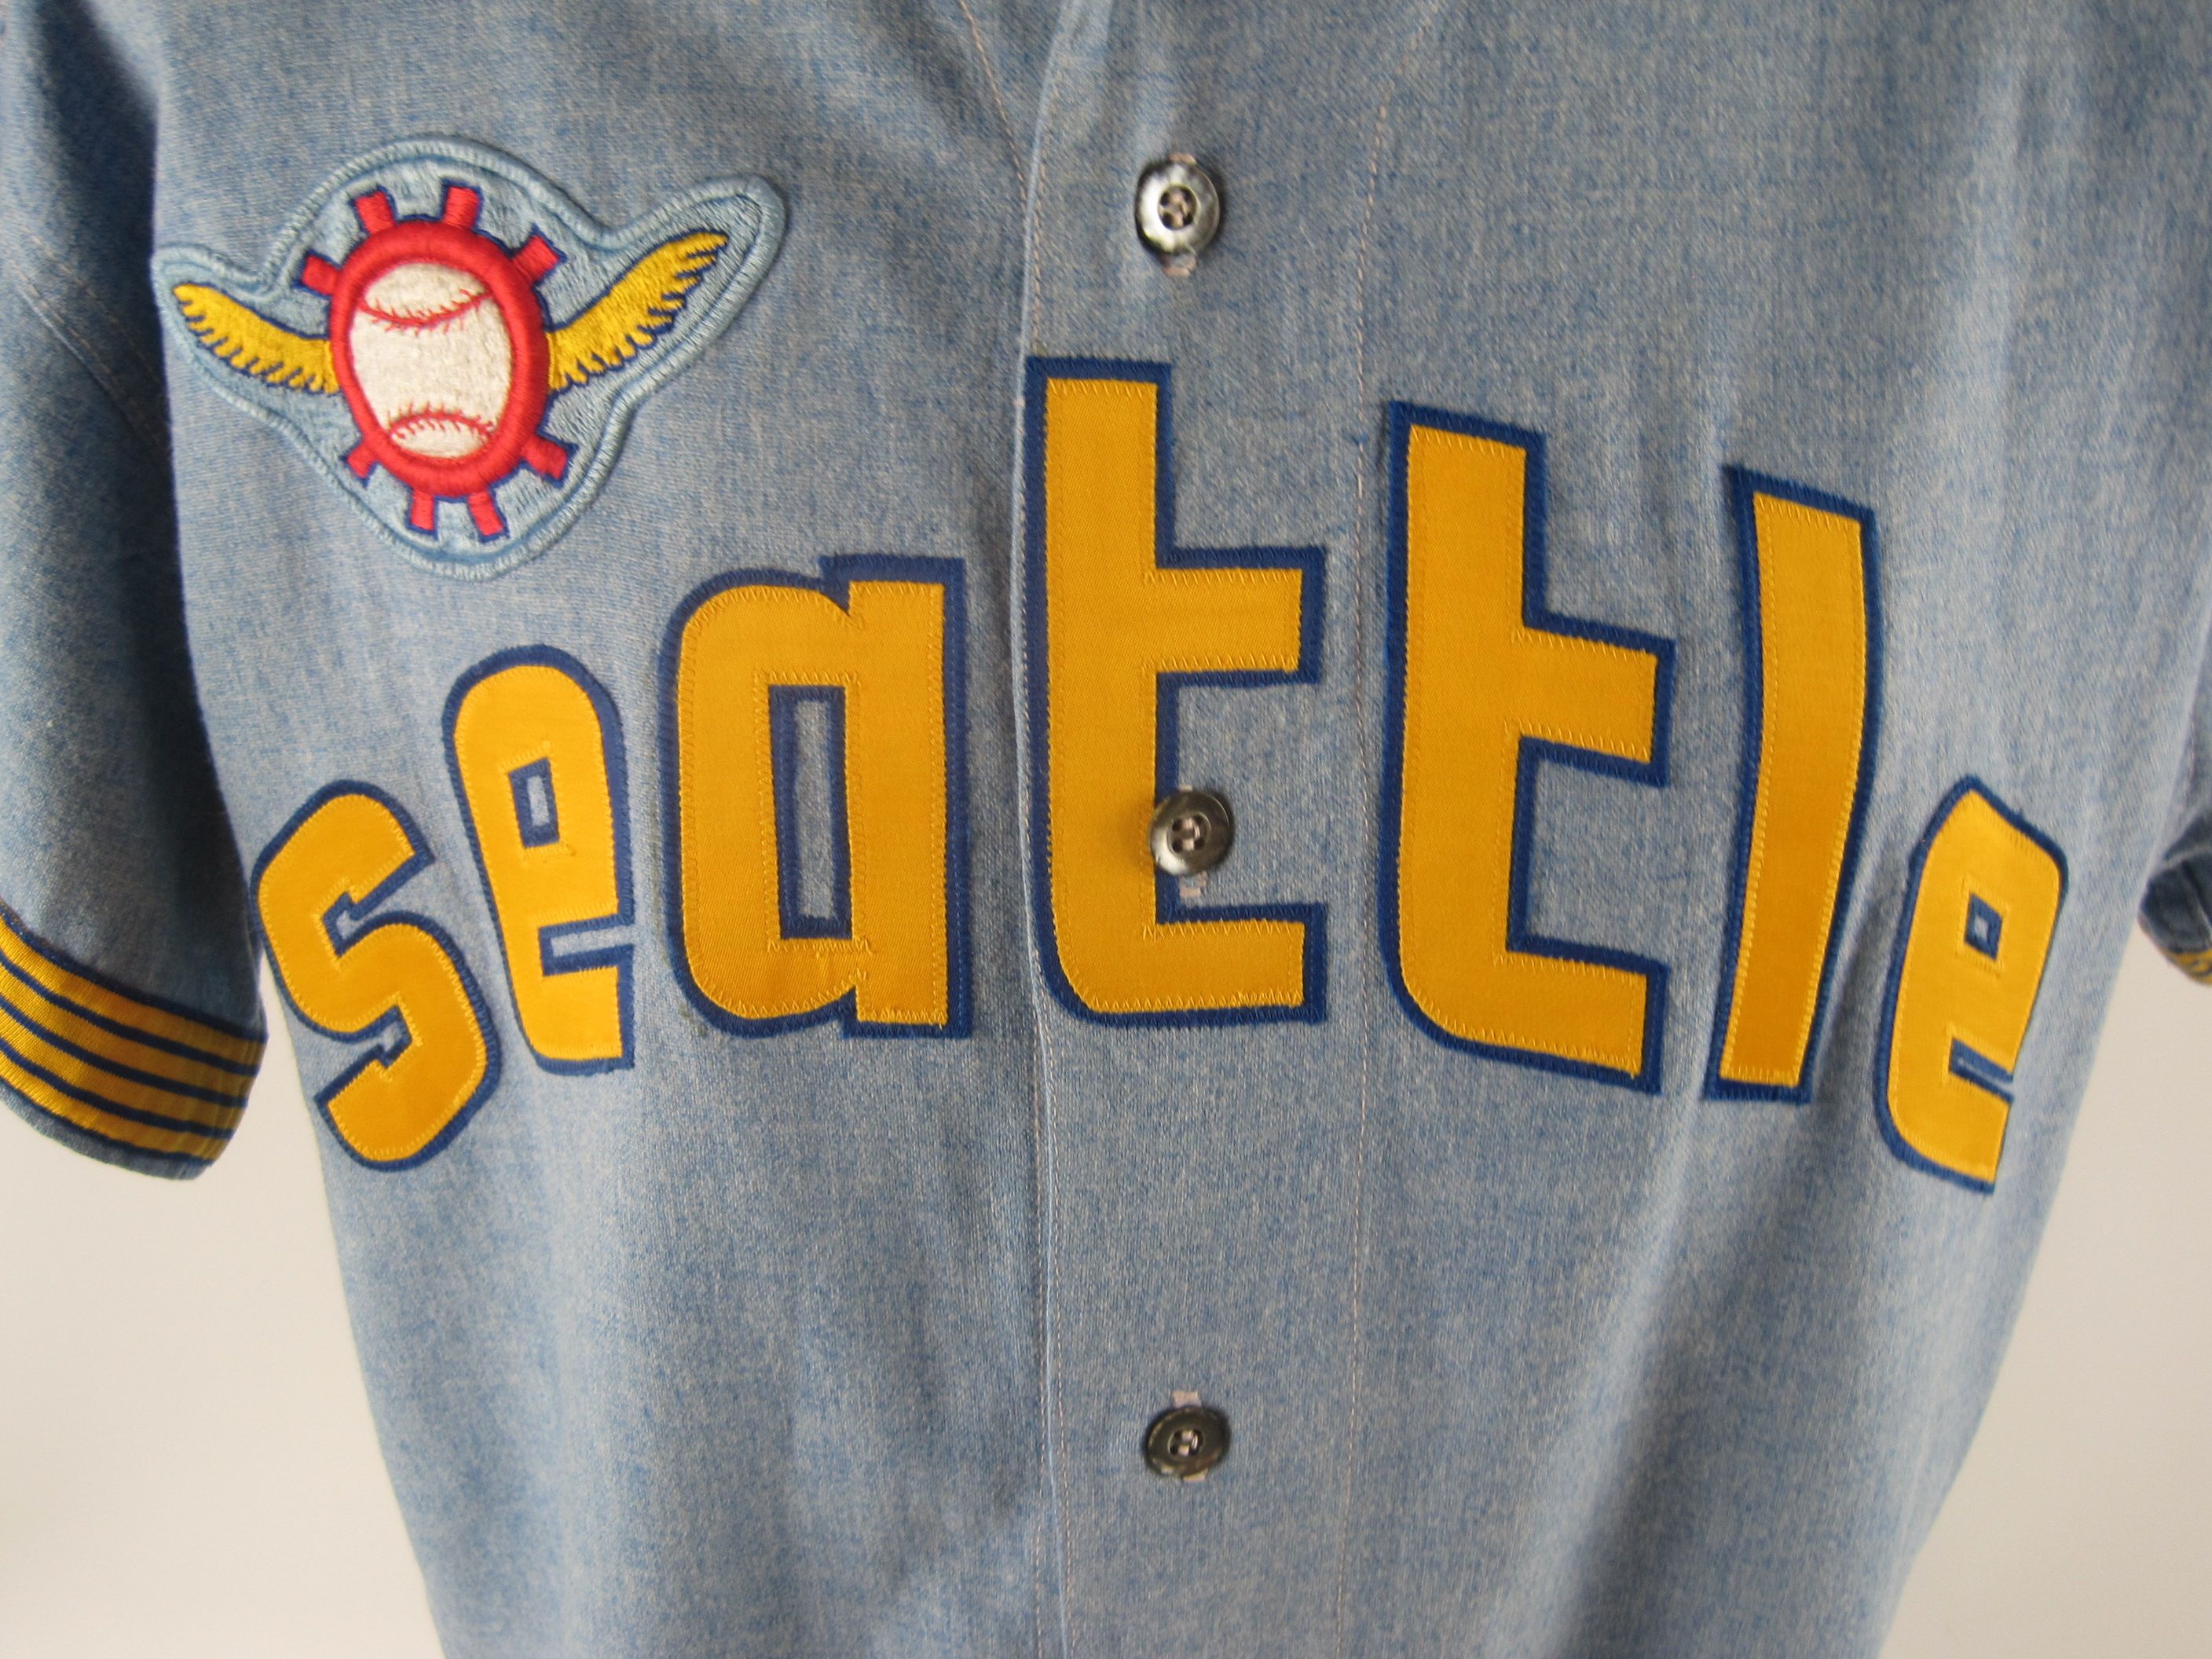 Mitchell & Ness 1969 Seattle Pilots Jersey for Sale in Puyallup